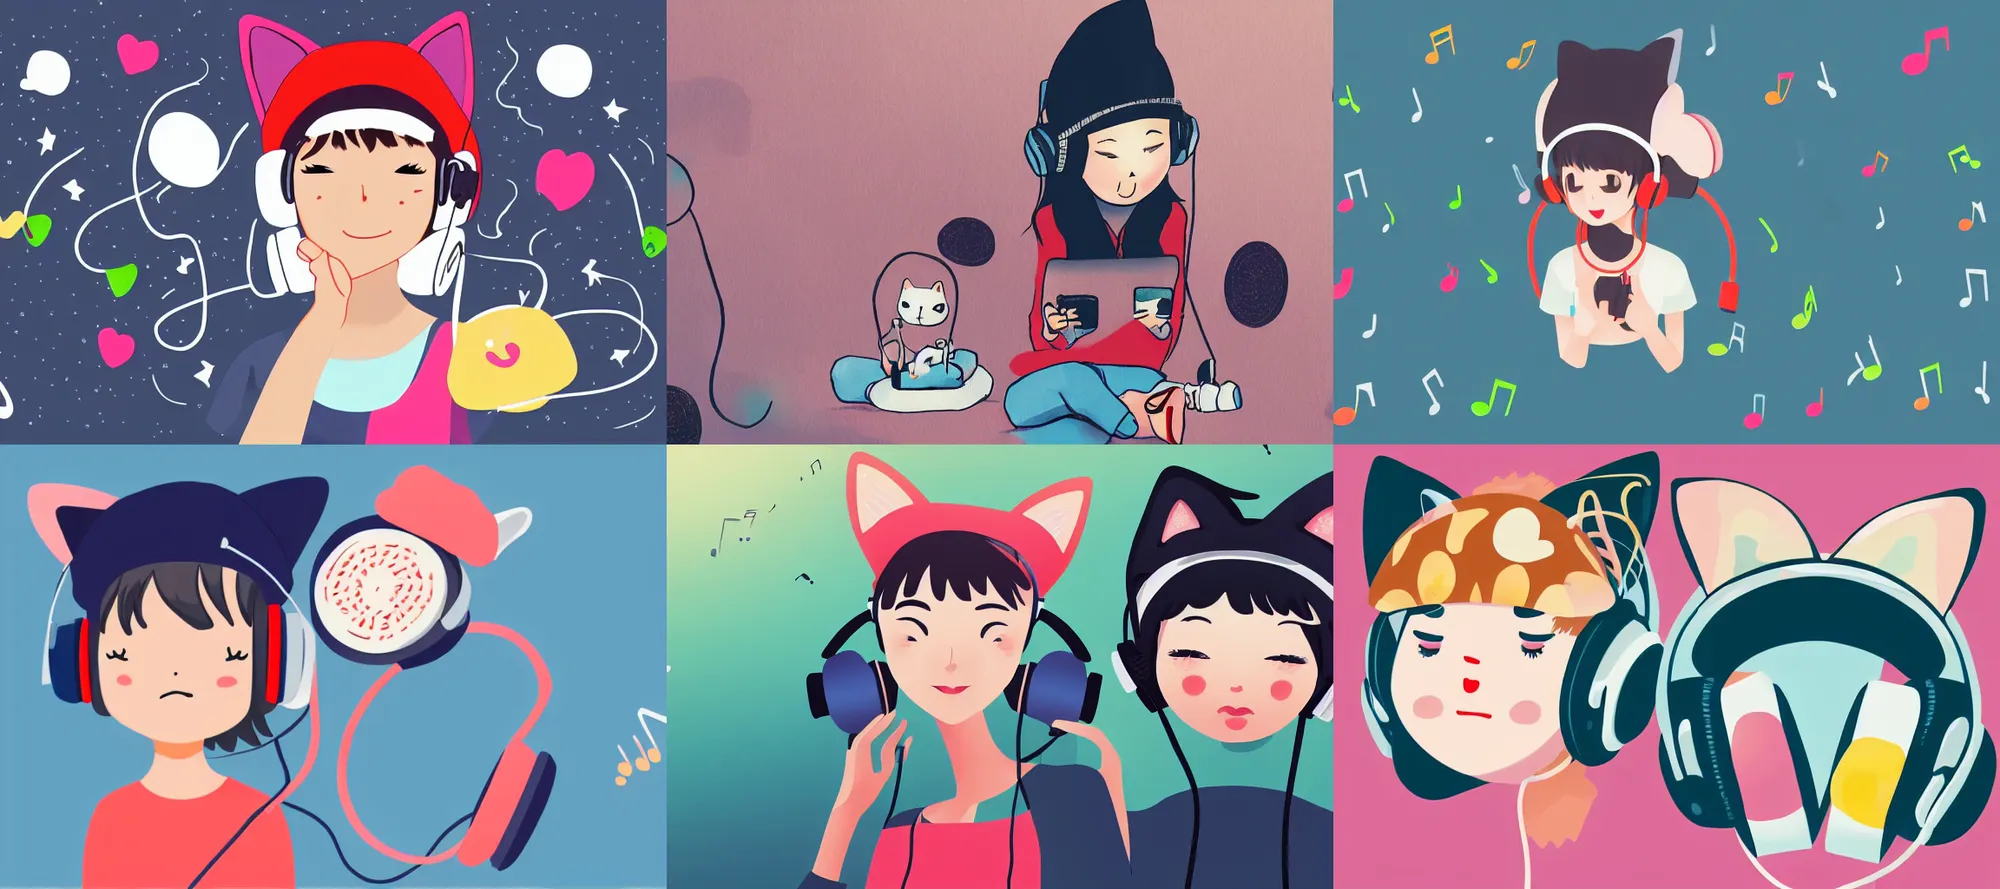 Prompt: Kawaii illustration girl in a cat hat listening to music on headphones